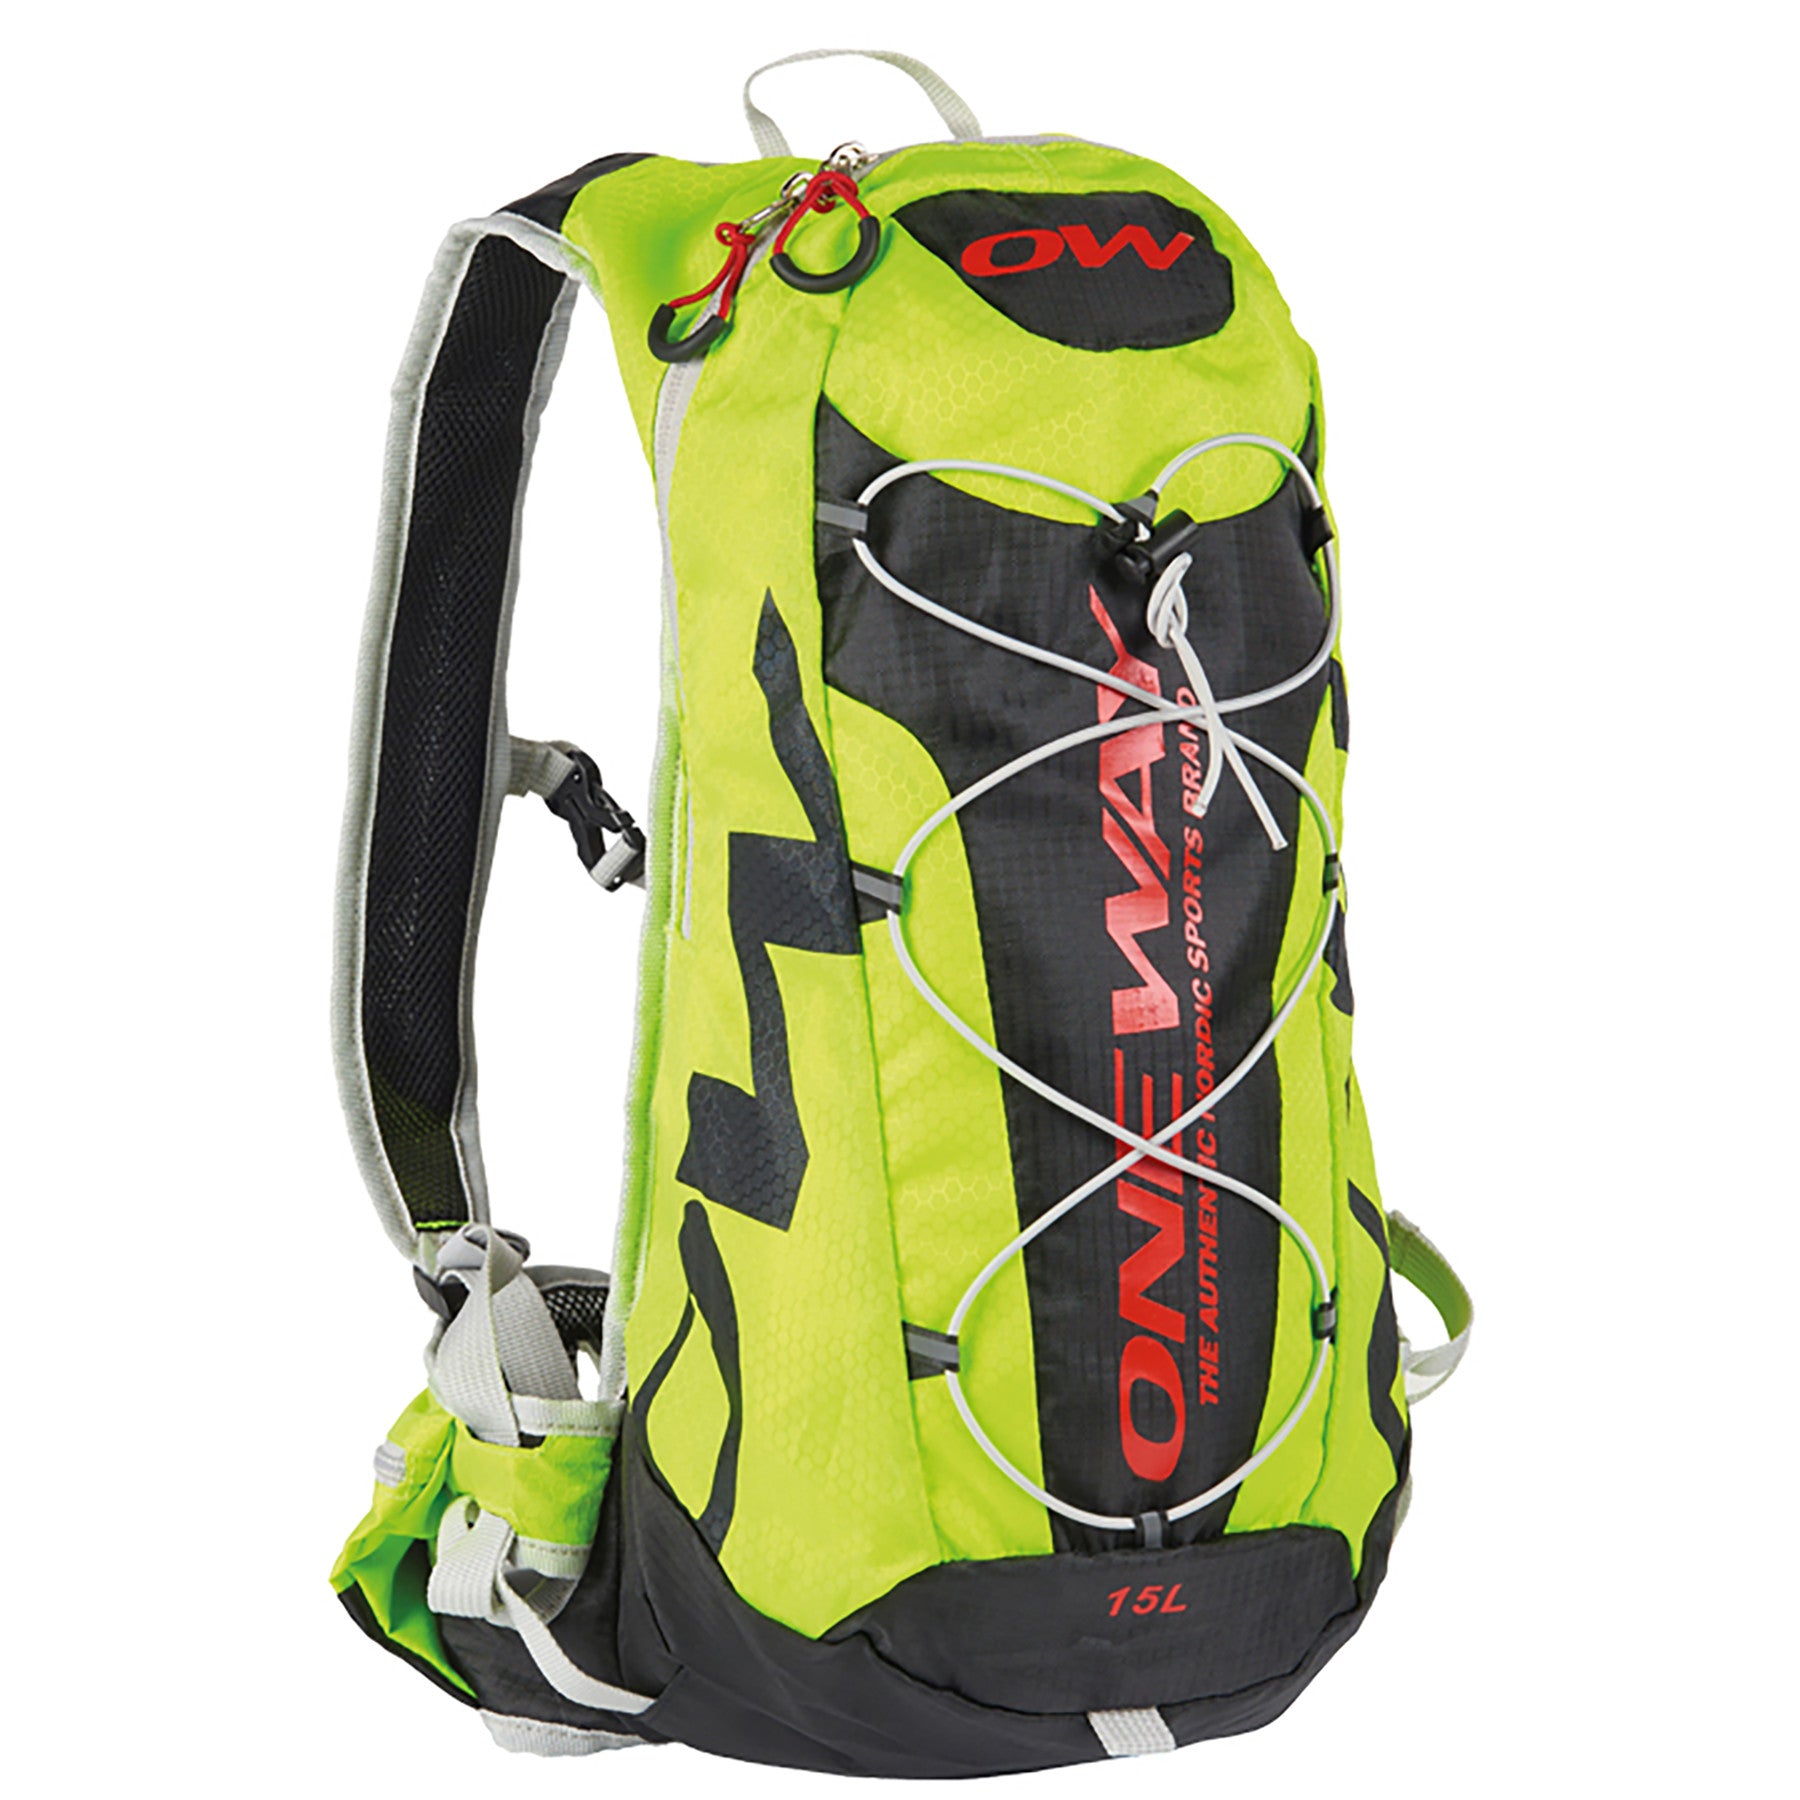 One Way XC HYDRO BACKPACK 15L - YELLOW